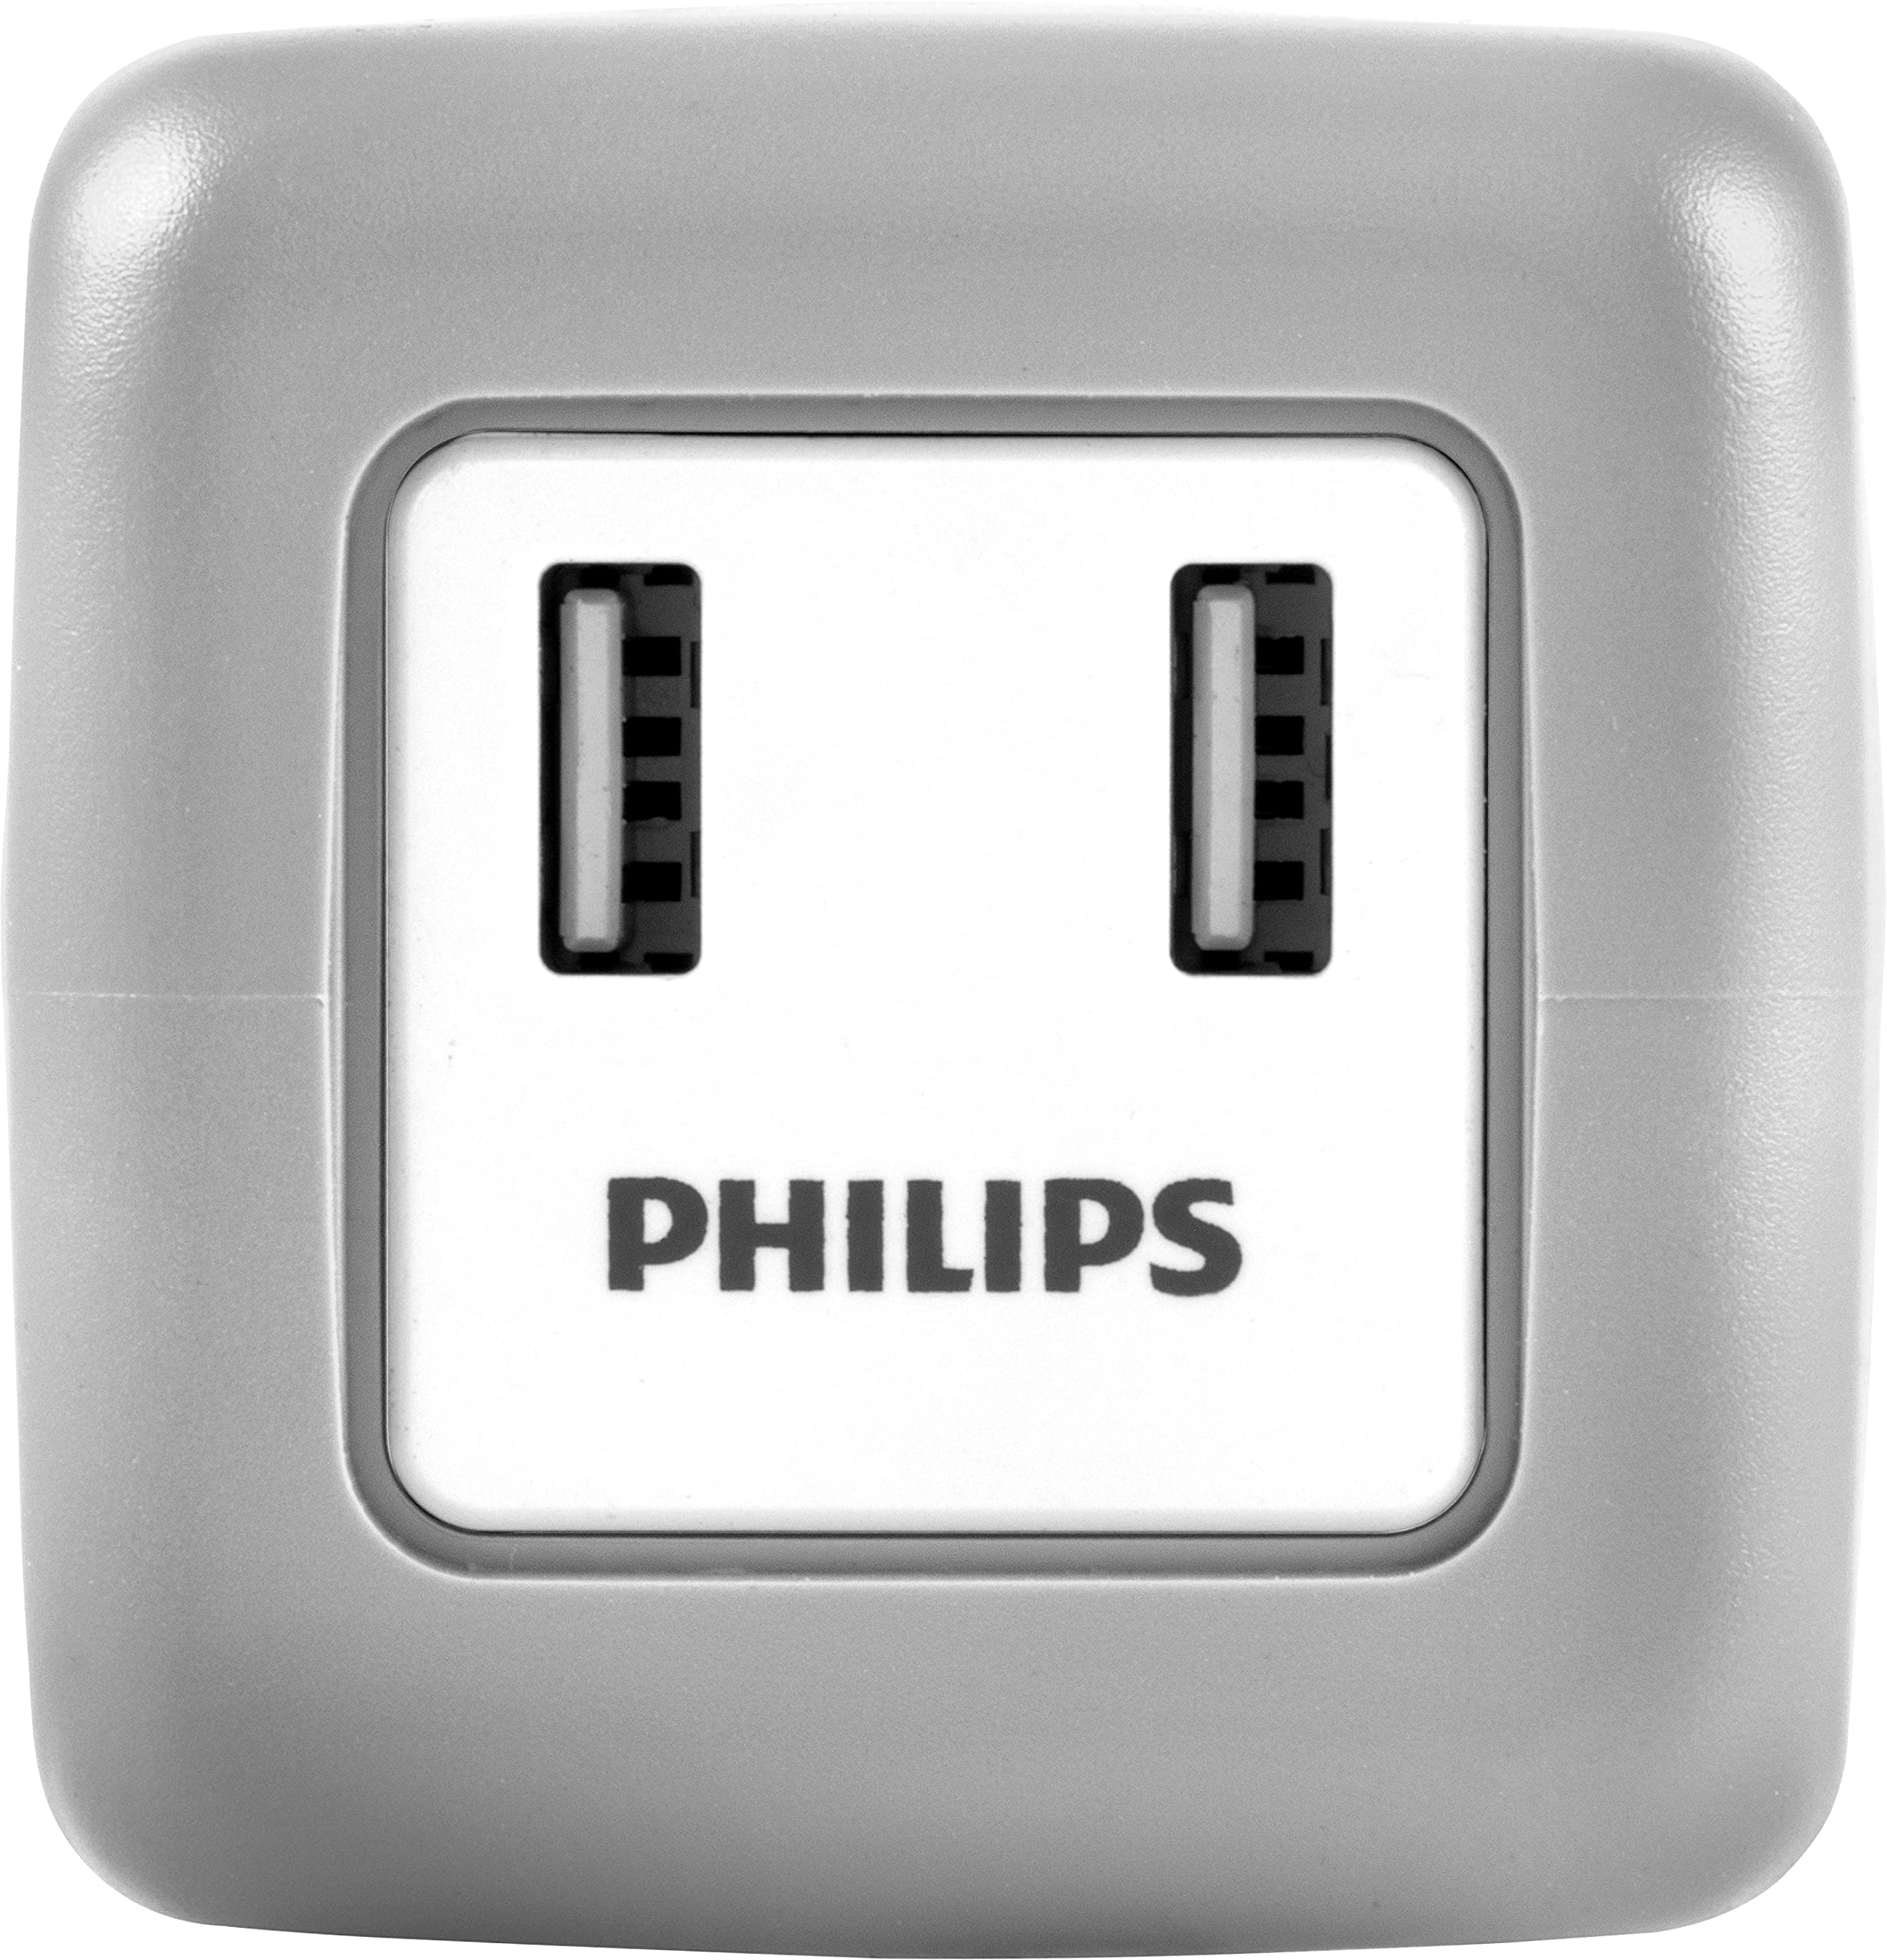 Philips Accessories 3-Outlet Extender Surge Protector with 2-USB Ports, Rubberized Cube, Extra-Wide Adapter Spaced, Easy Access Design, 3-Prong, Perfect for Travel, 2.4A, 245J, Gray, SPP3202GR/37